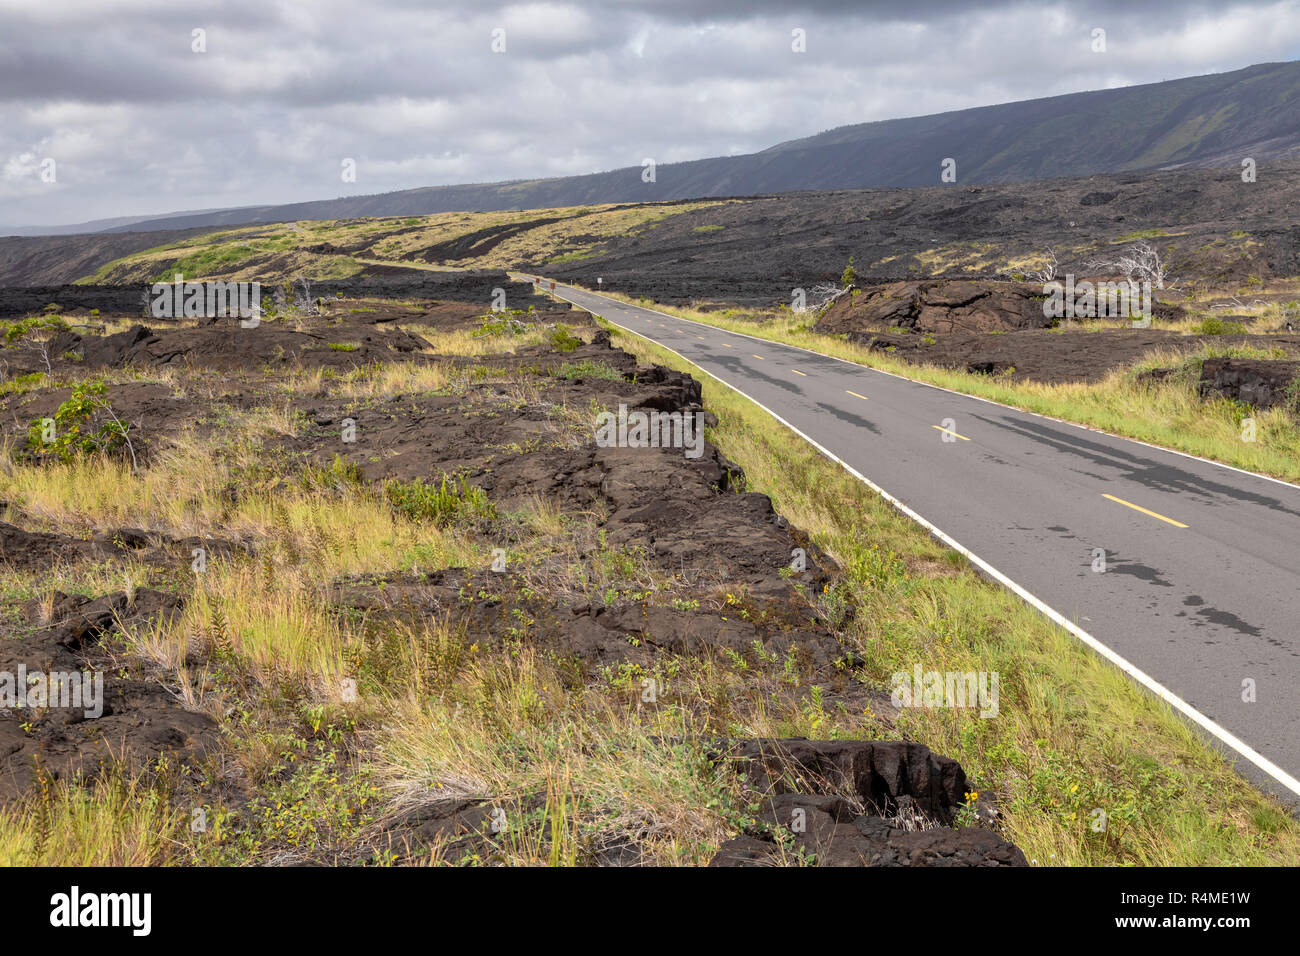 Hawaii Volcanoes National Park, Hawaii - Chain of Craters Road through lava beds near the Pacific coastline. Stock Photo